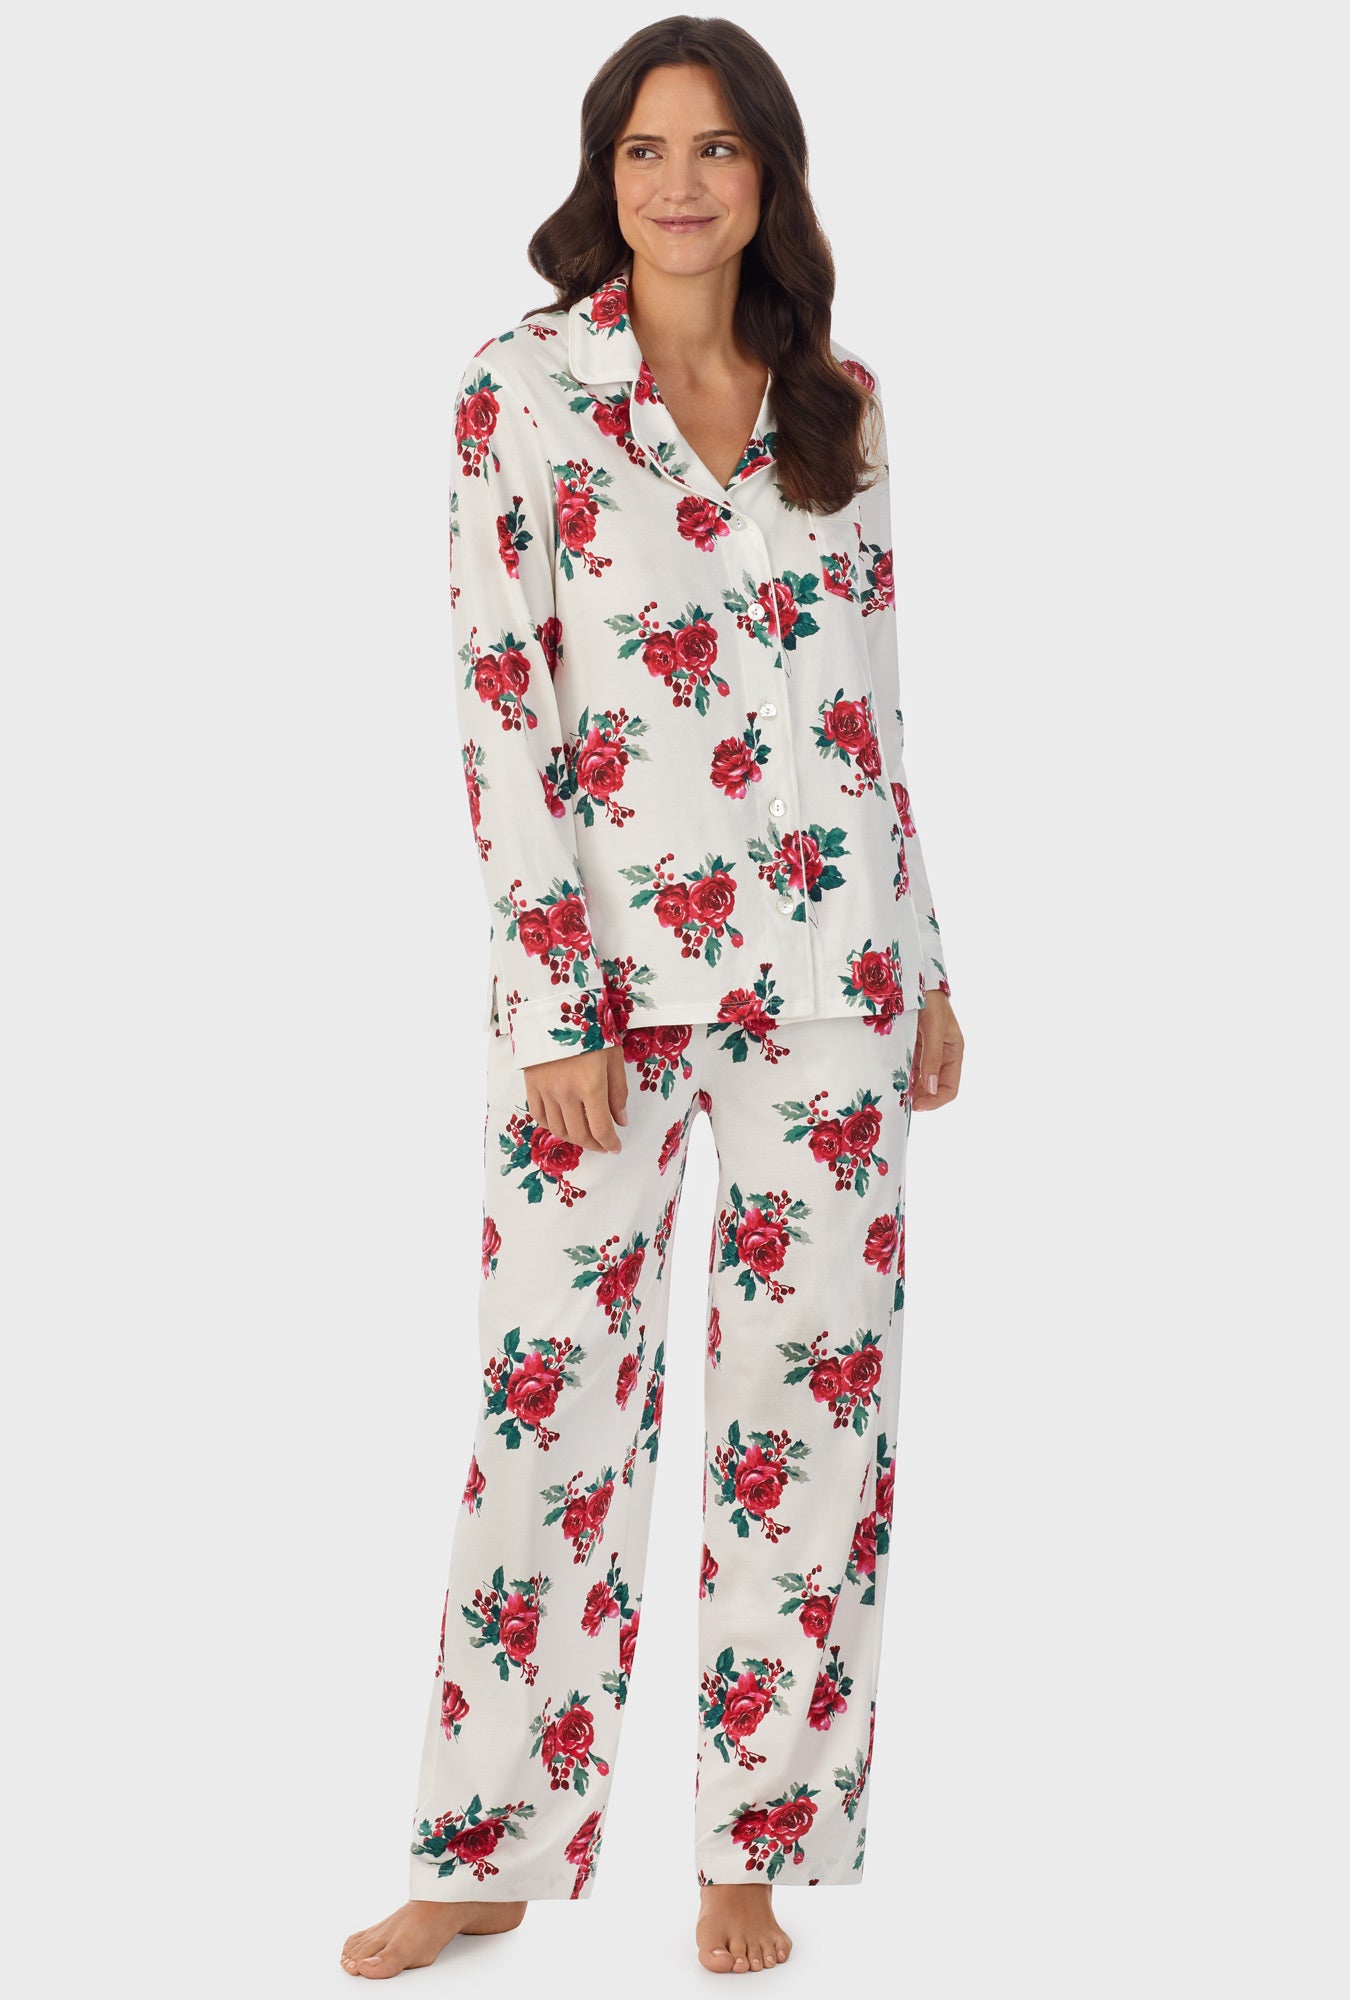 A lady wearing white long pajama set with red rose print